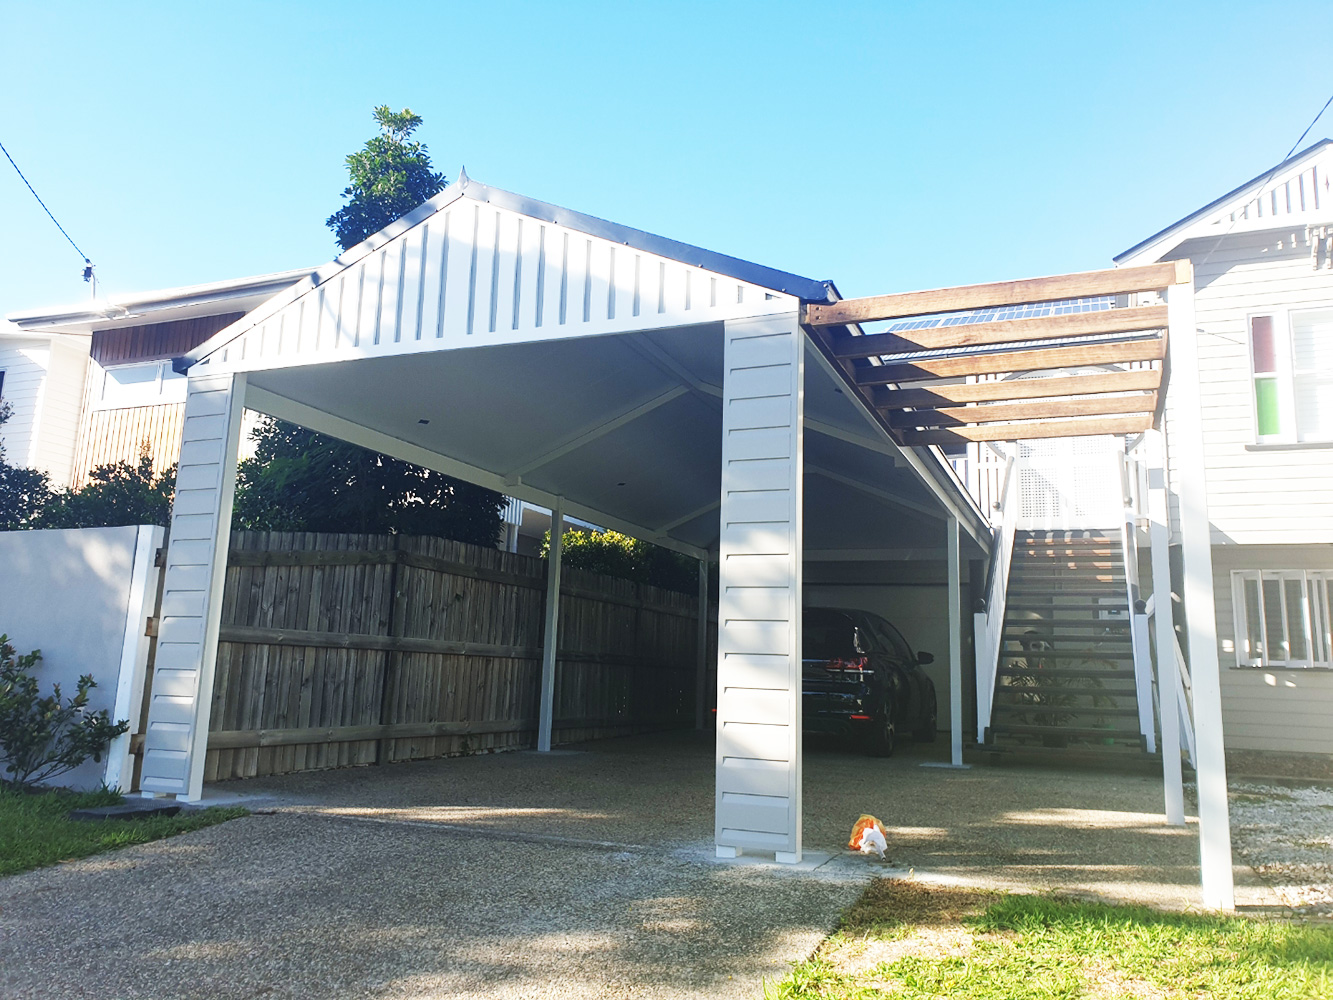 Gable pitched carport. Fully welded and Dulux powder coated. All-Gal trusses and beams. Weather board cladding and a fibre cement sheet with decorative cover strips to create an appealing facade. This structure is complete with a hardwood planter trellis.